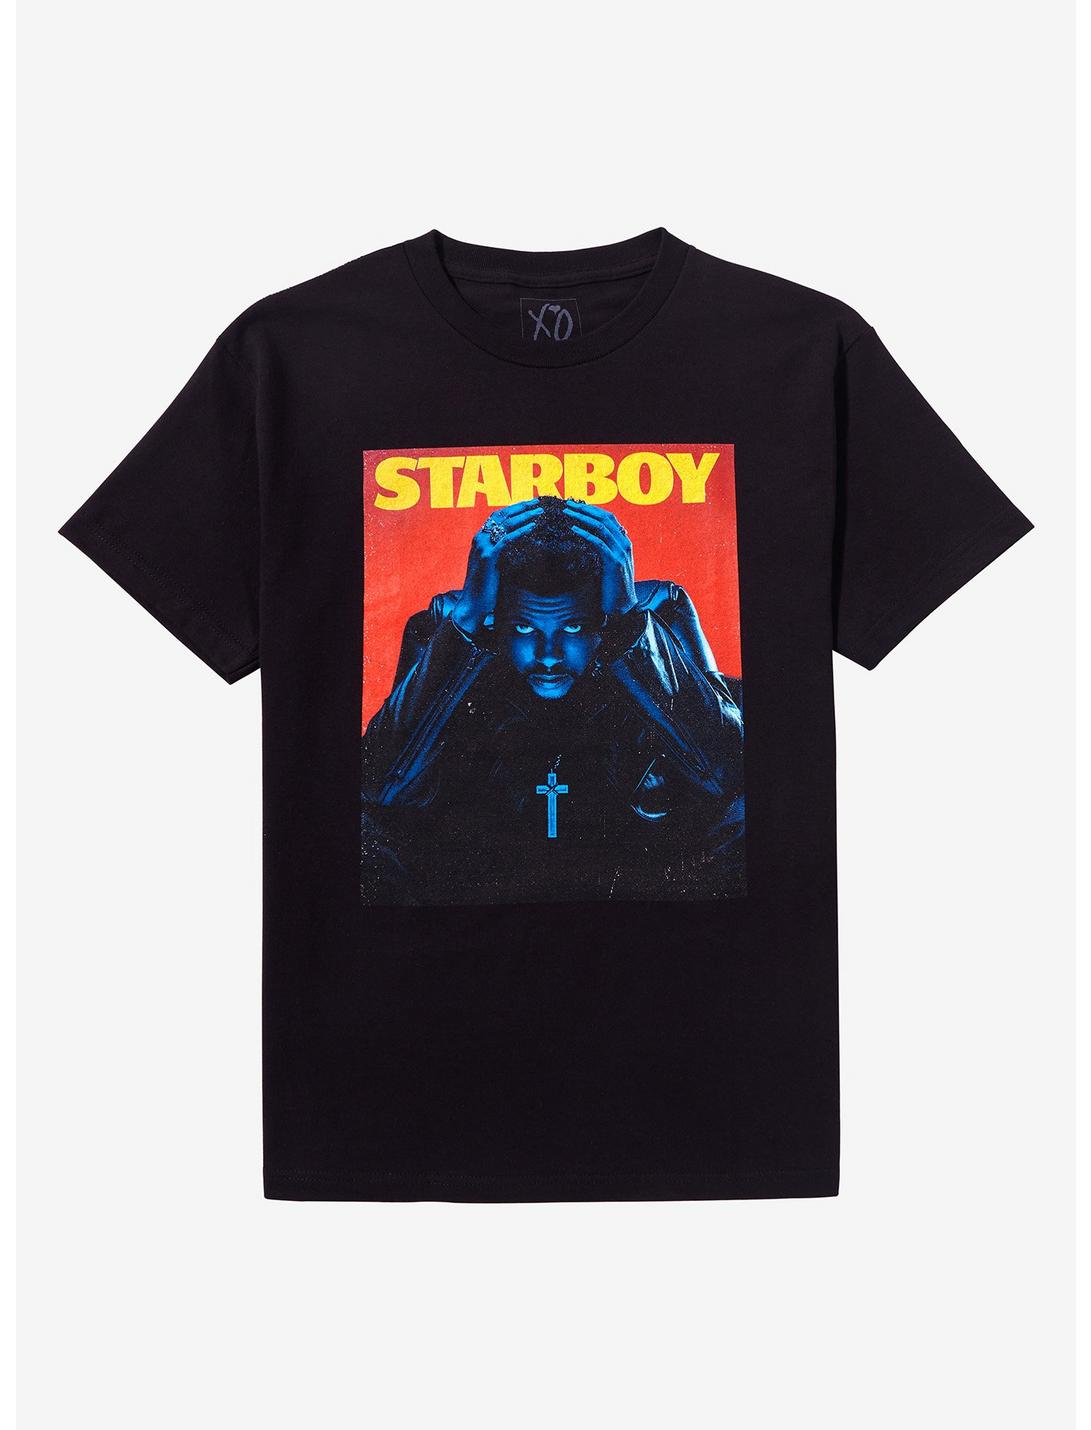 The Weeknd Starboy Cover T-Shirt, BLACK, hi-res